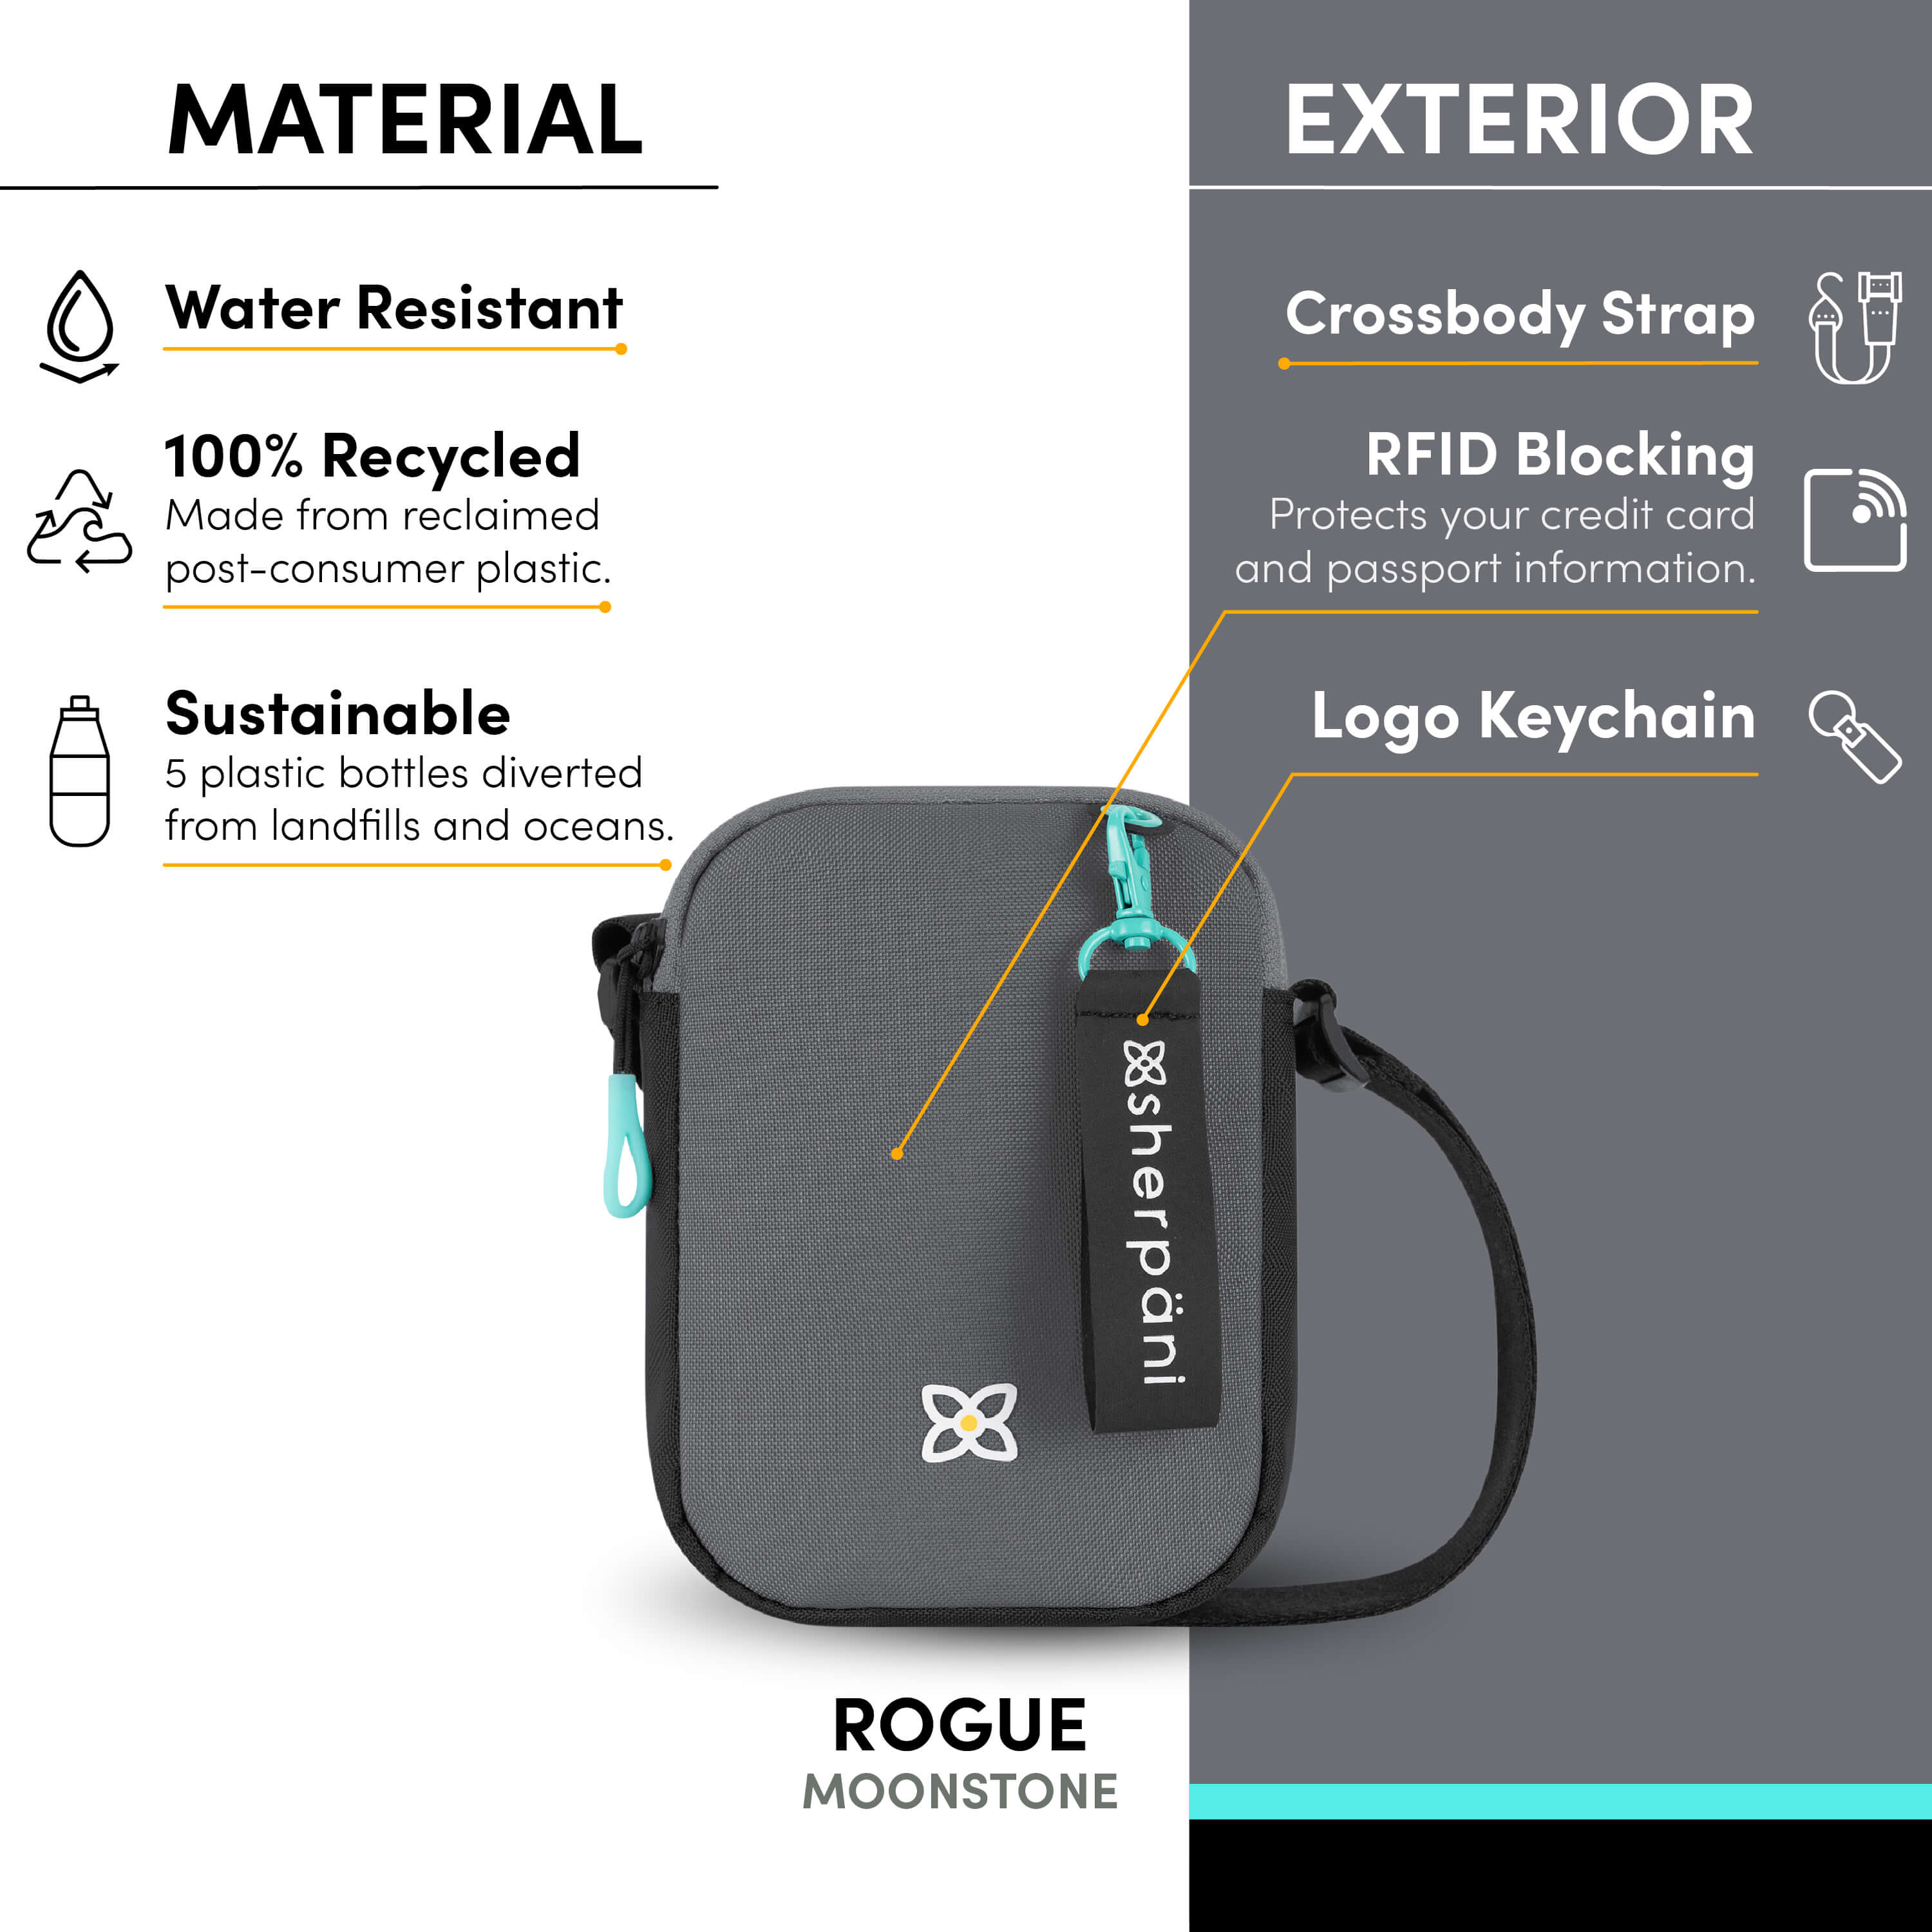 Graphic showing the features of Sherpani crossbody travel bag, the Rogue: water-resistant purse, made from recycled materials, adjustable crossbody strap, RFID protection, Sherpani logo keychain. 